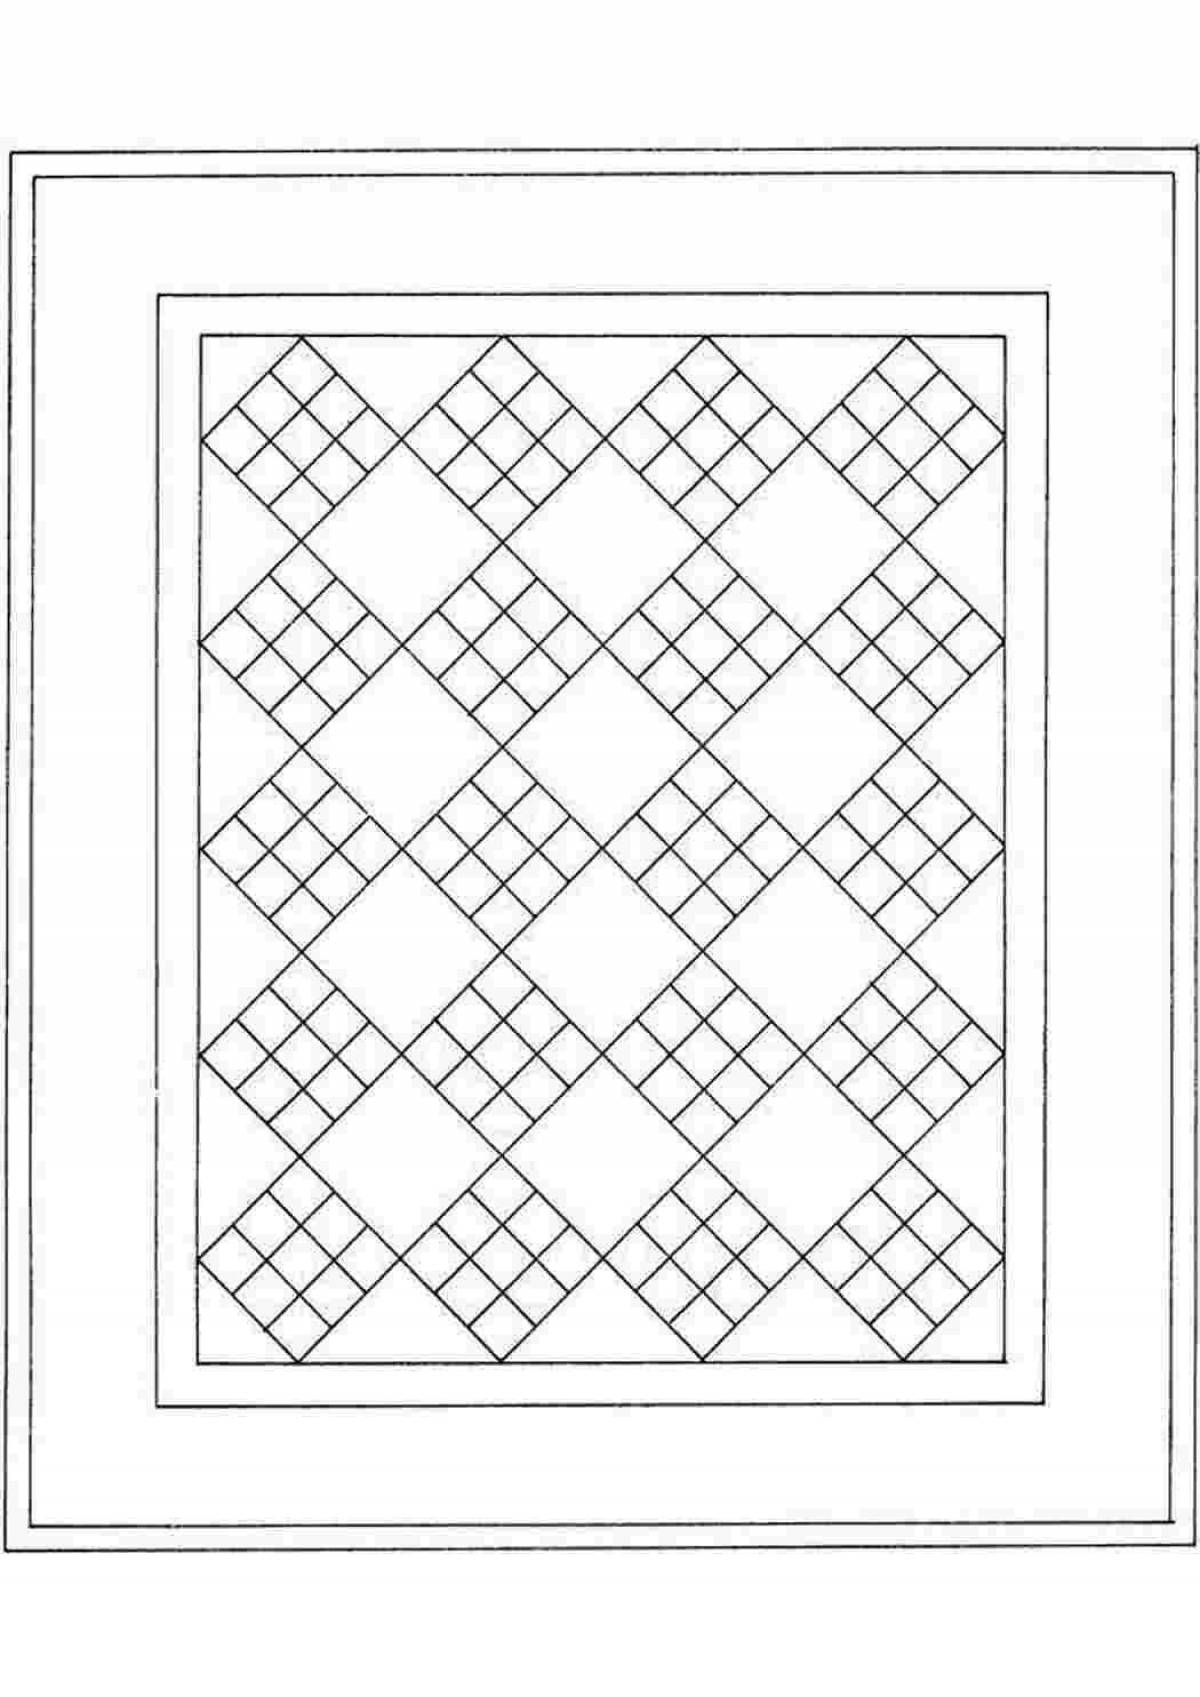 Amazing carpet coloring page for the little ones